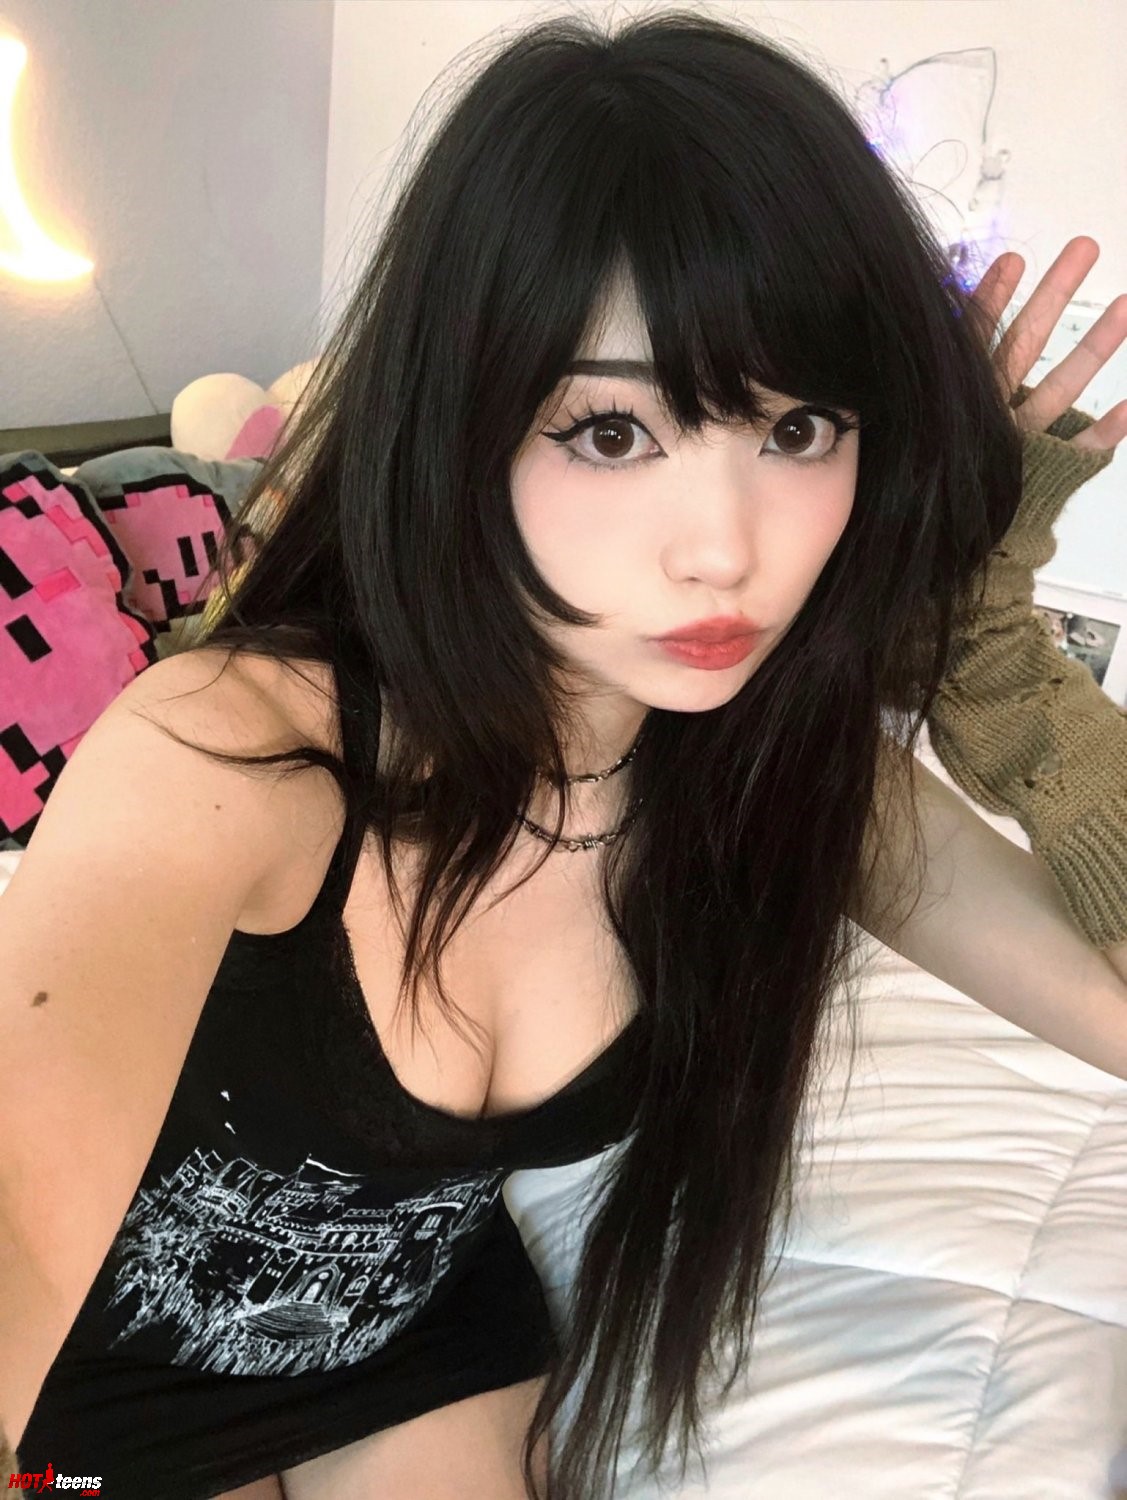 Explore Emiru's Most Intimate Moments in Stunning Nude Pics